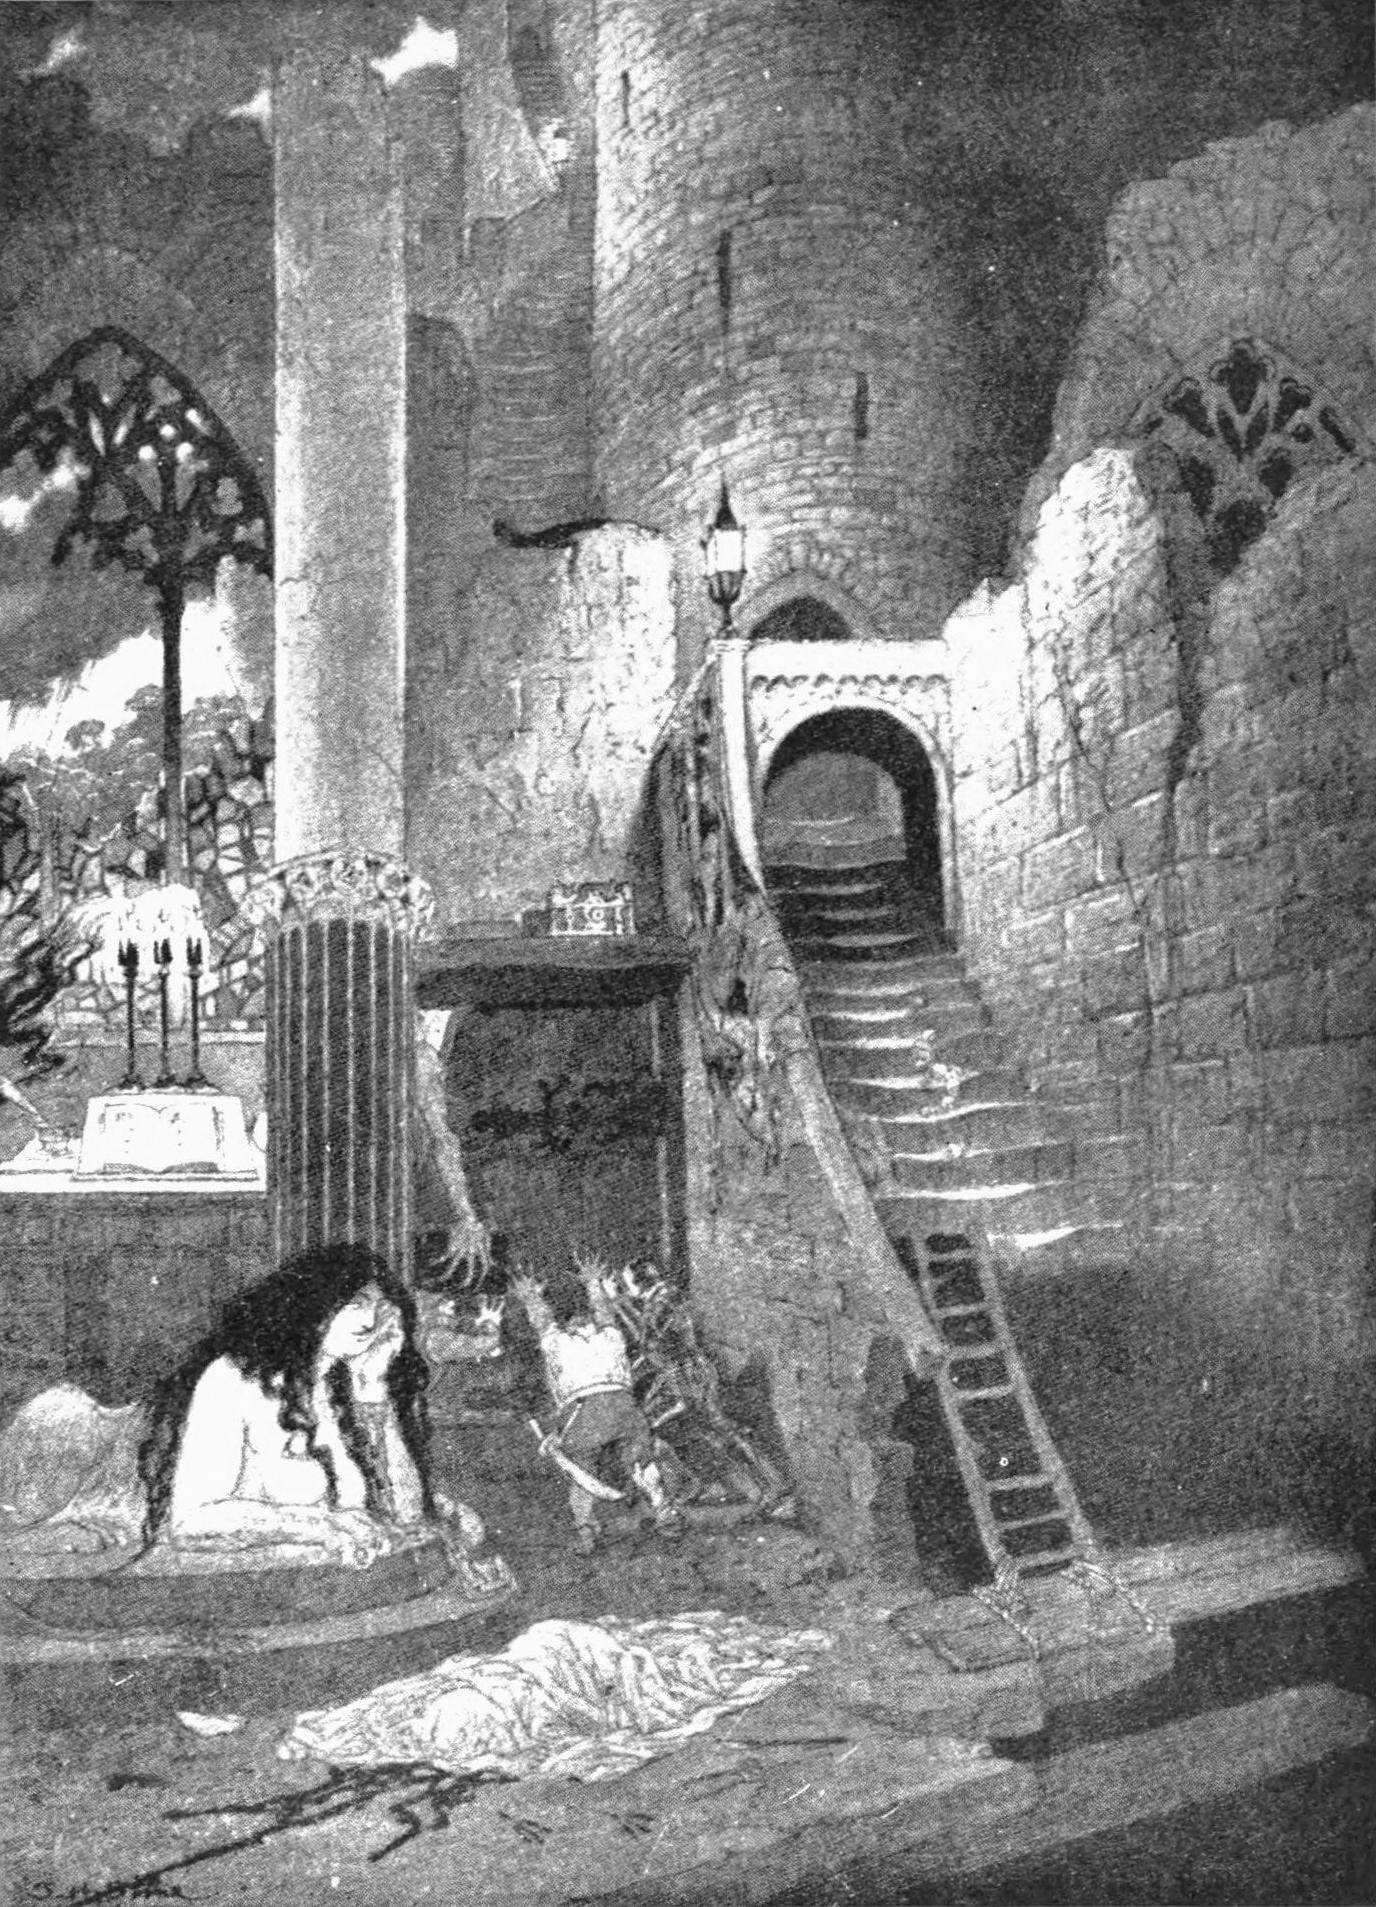 A strange Gothic castle lies in ruins. Two men try to hold the gates closed as a monstrous arm reaches out from the doorjamb. The Sphinx rests in front of them with head in her hand.